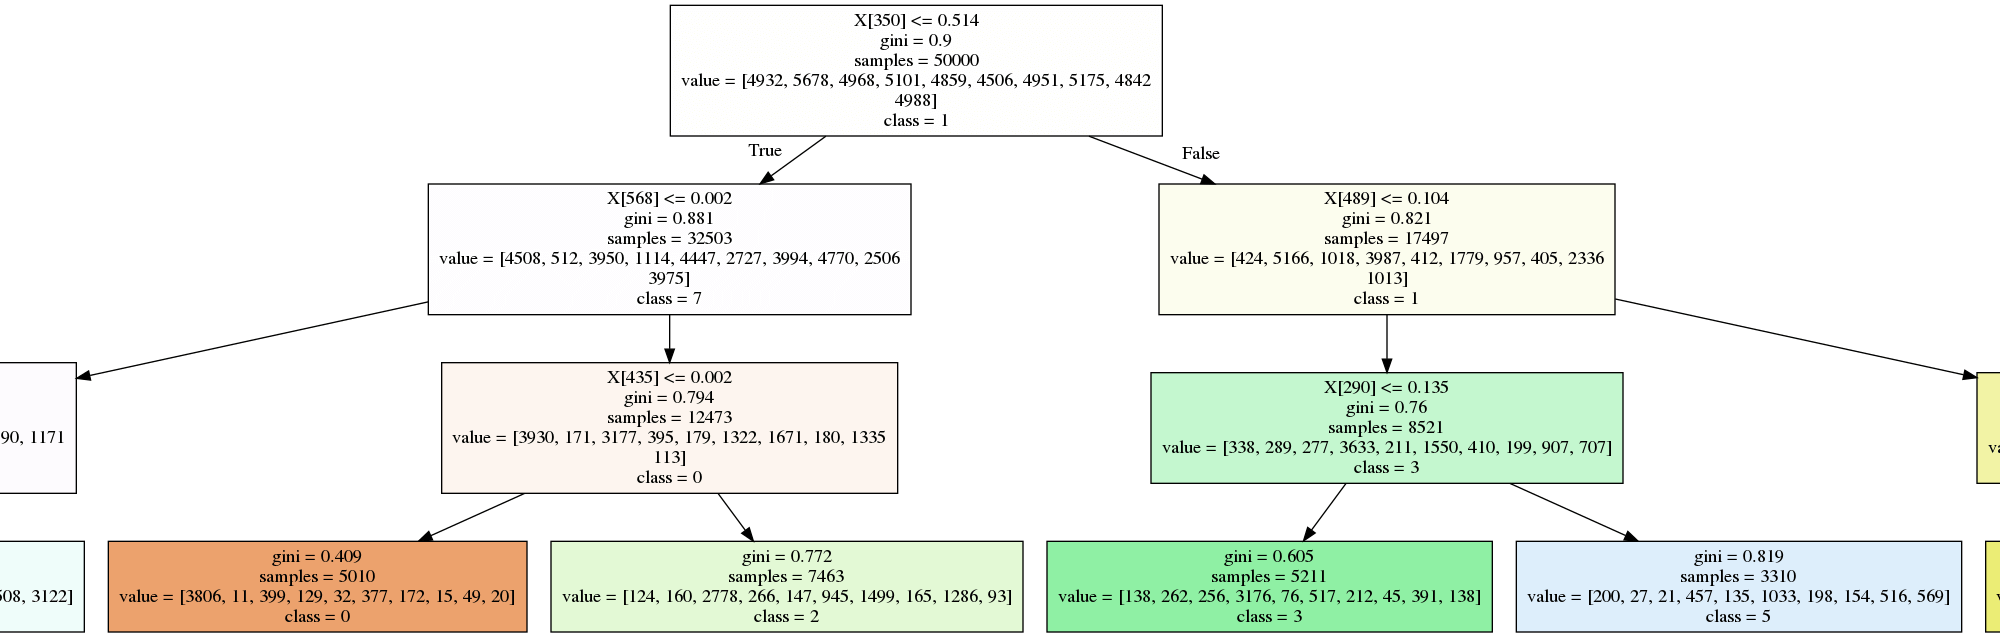 a normal decision tree trained on MNIST